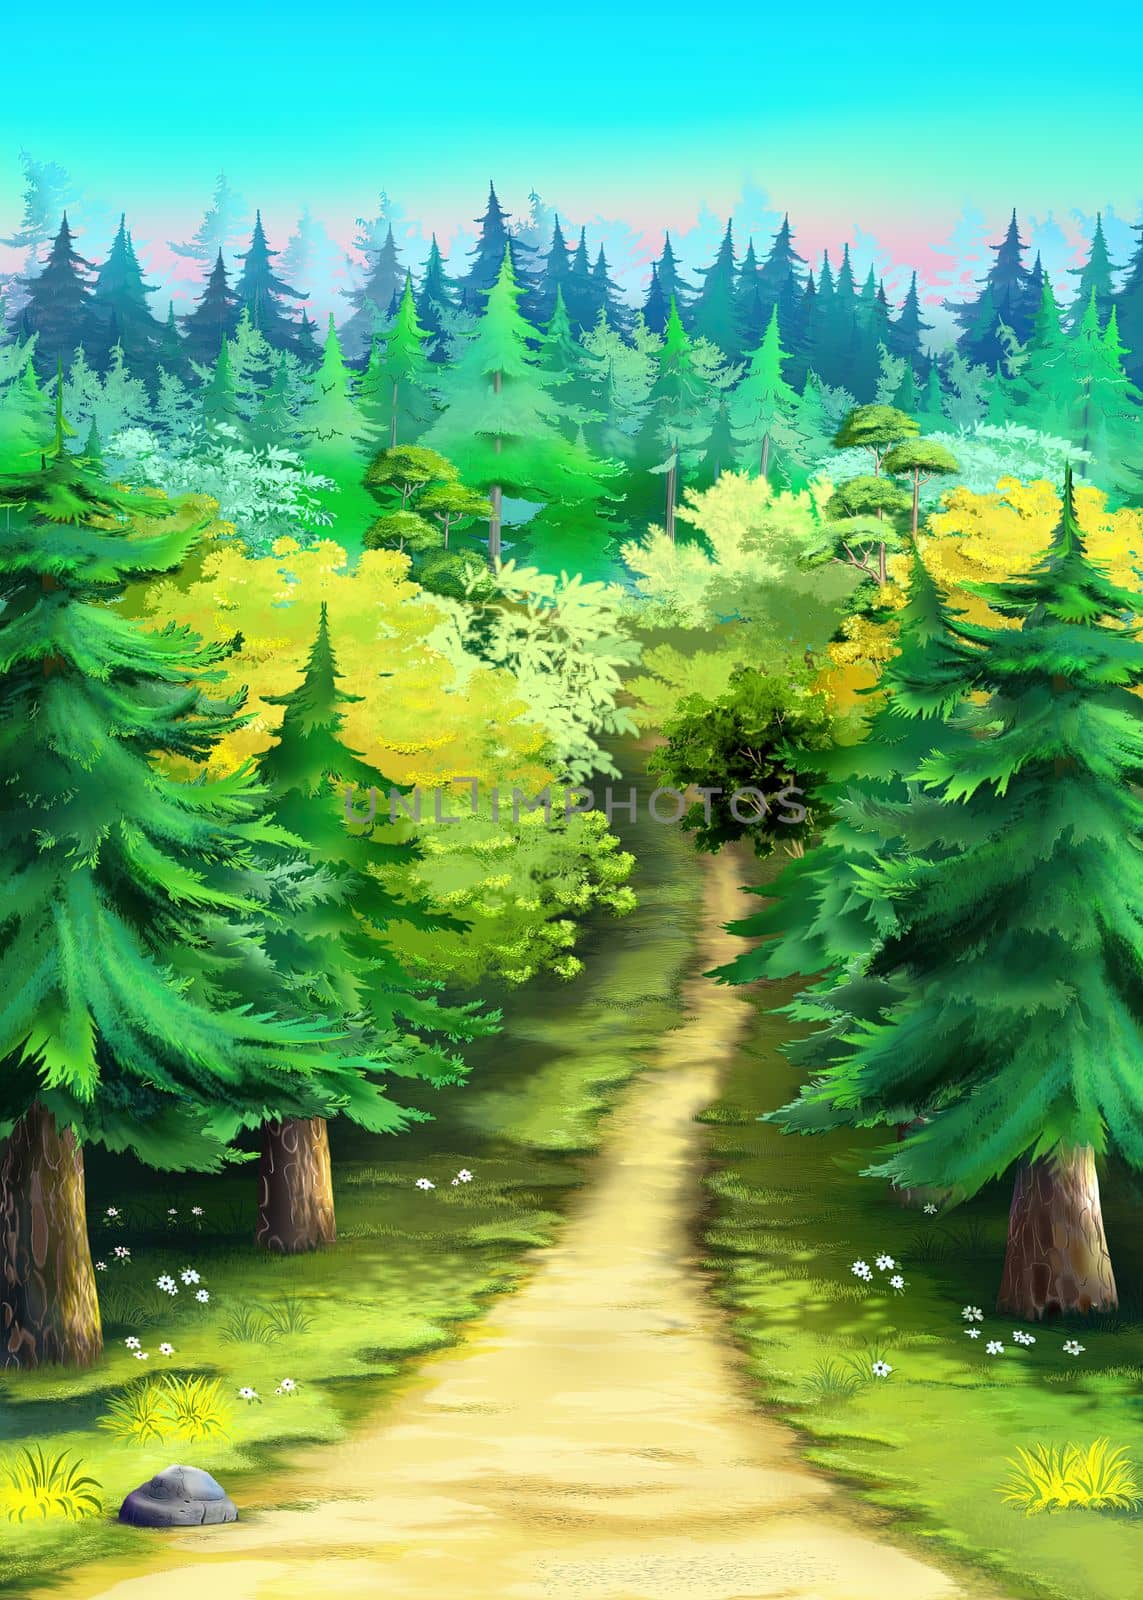 Forest path on a summer day illustration by Multipedia